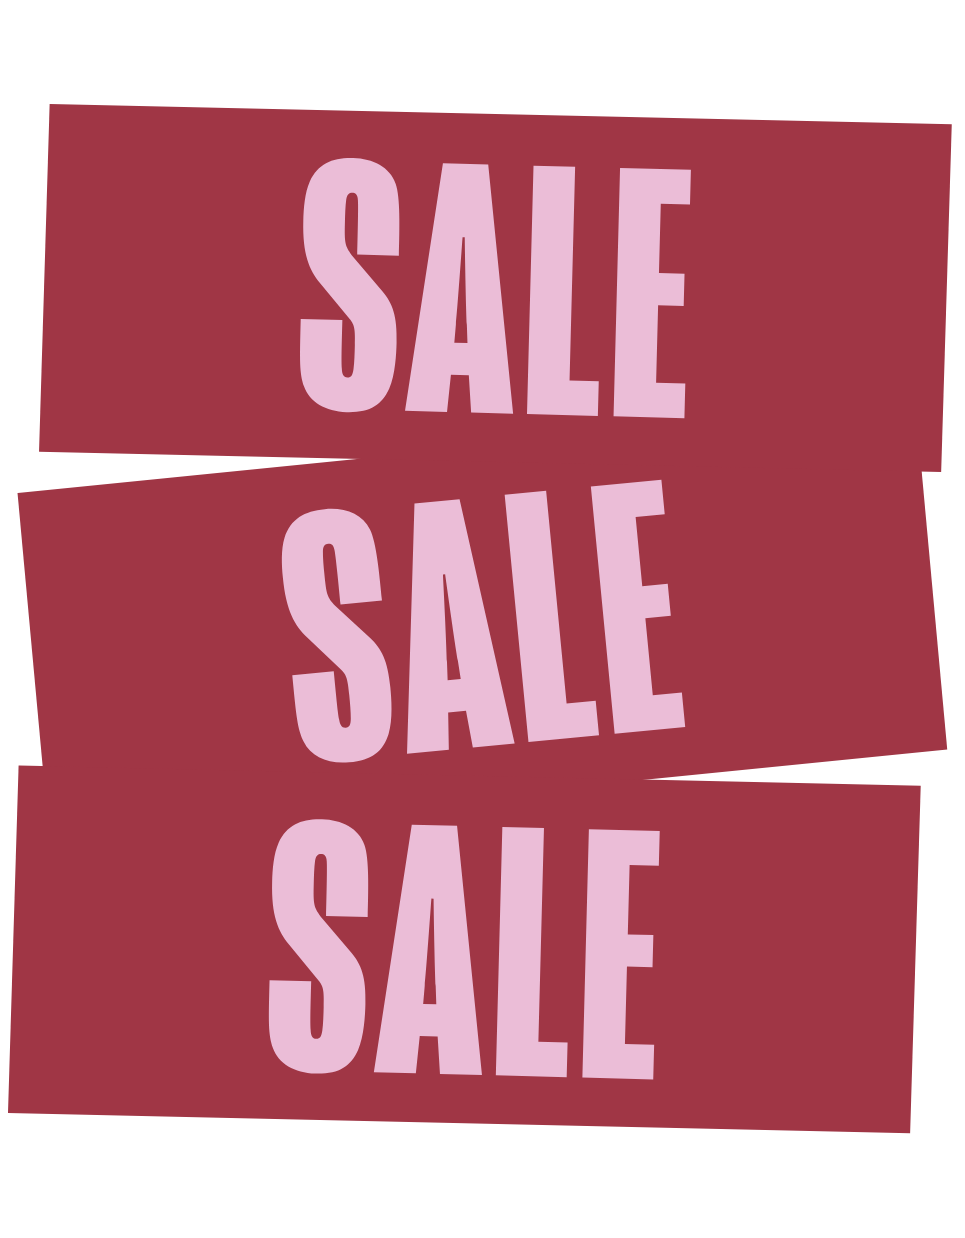 Sale: Up to 50% off